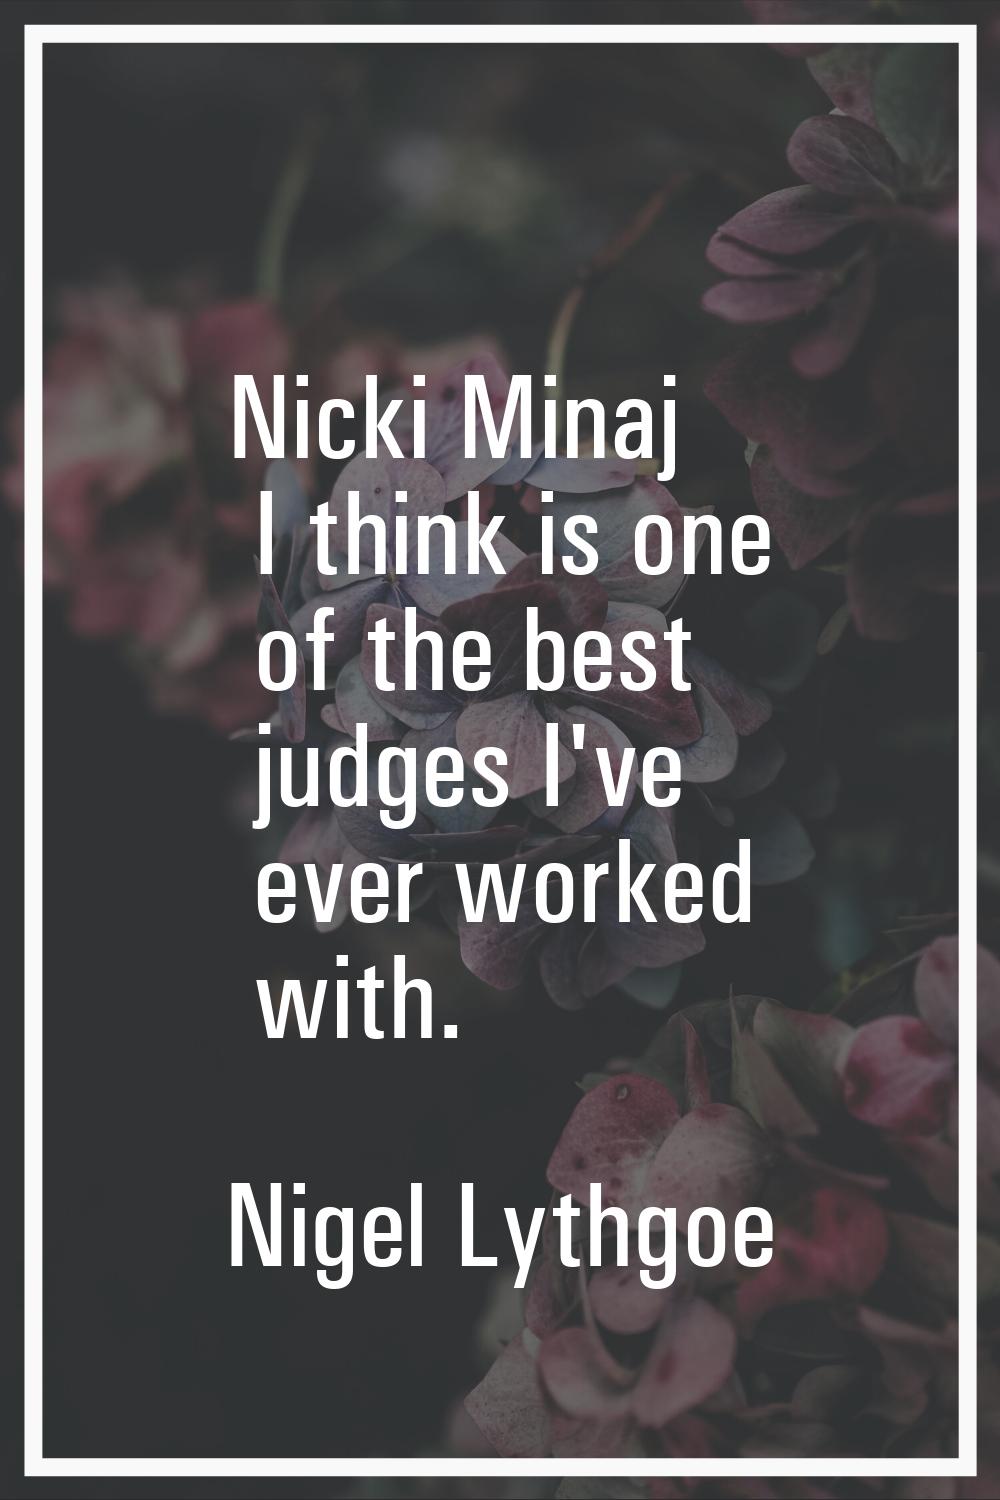 Nicki Minaj I think is one of the best judges I've ever worked with.